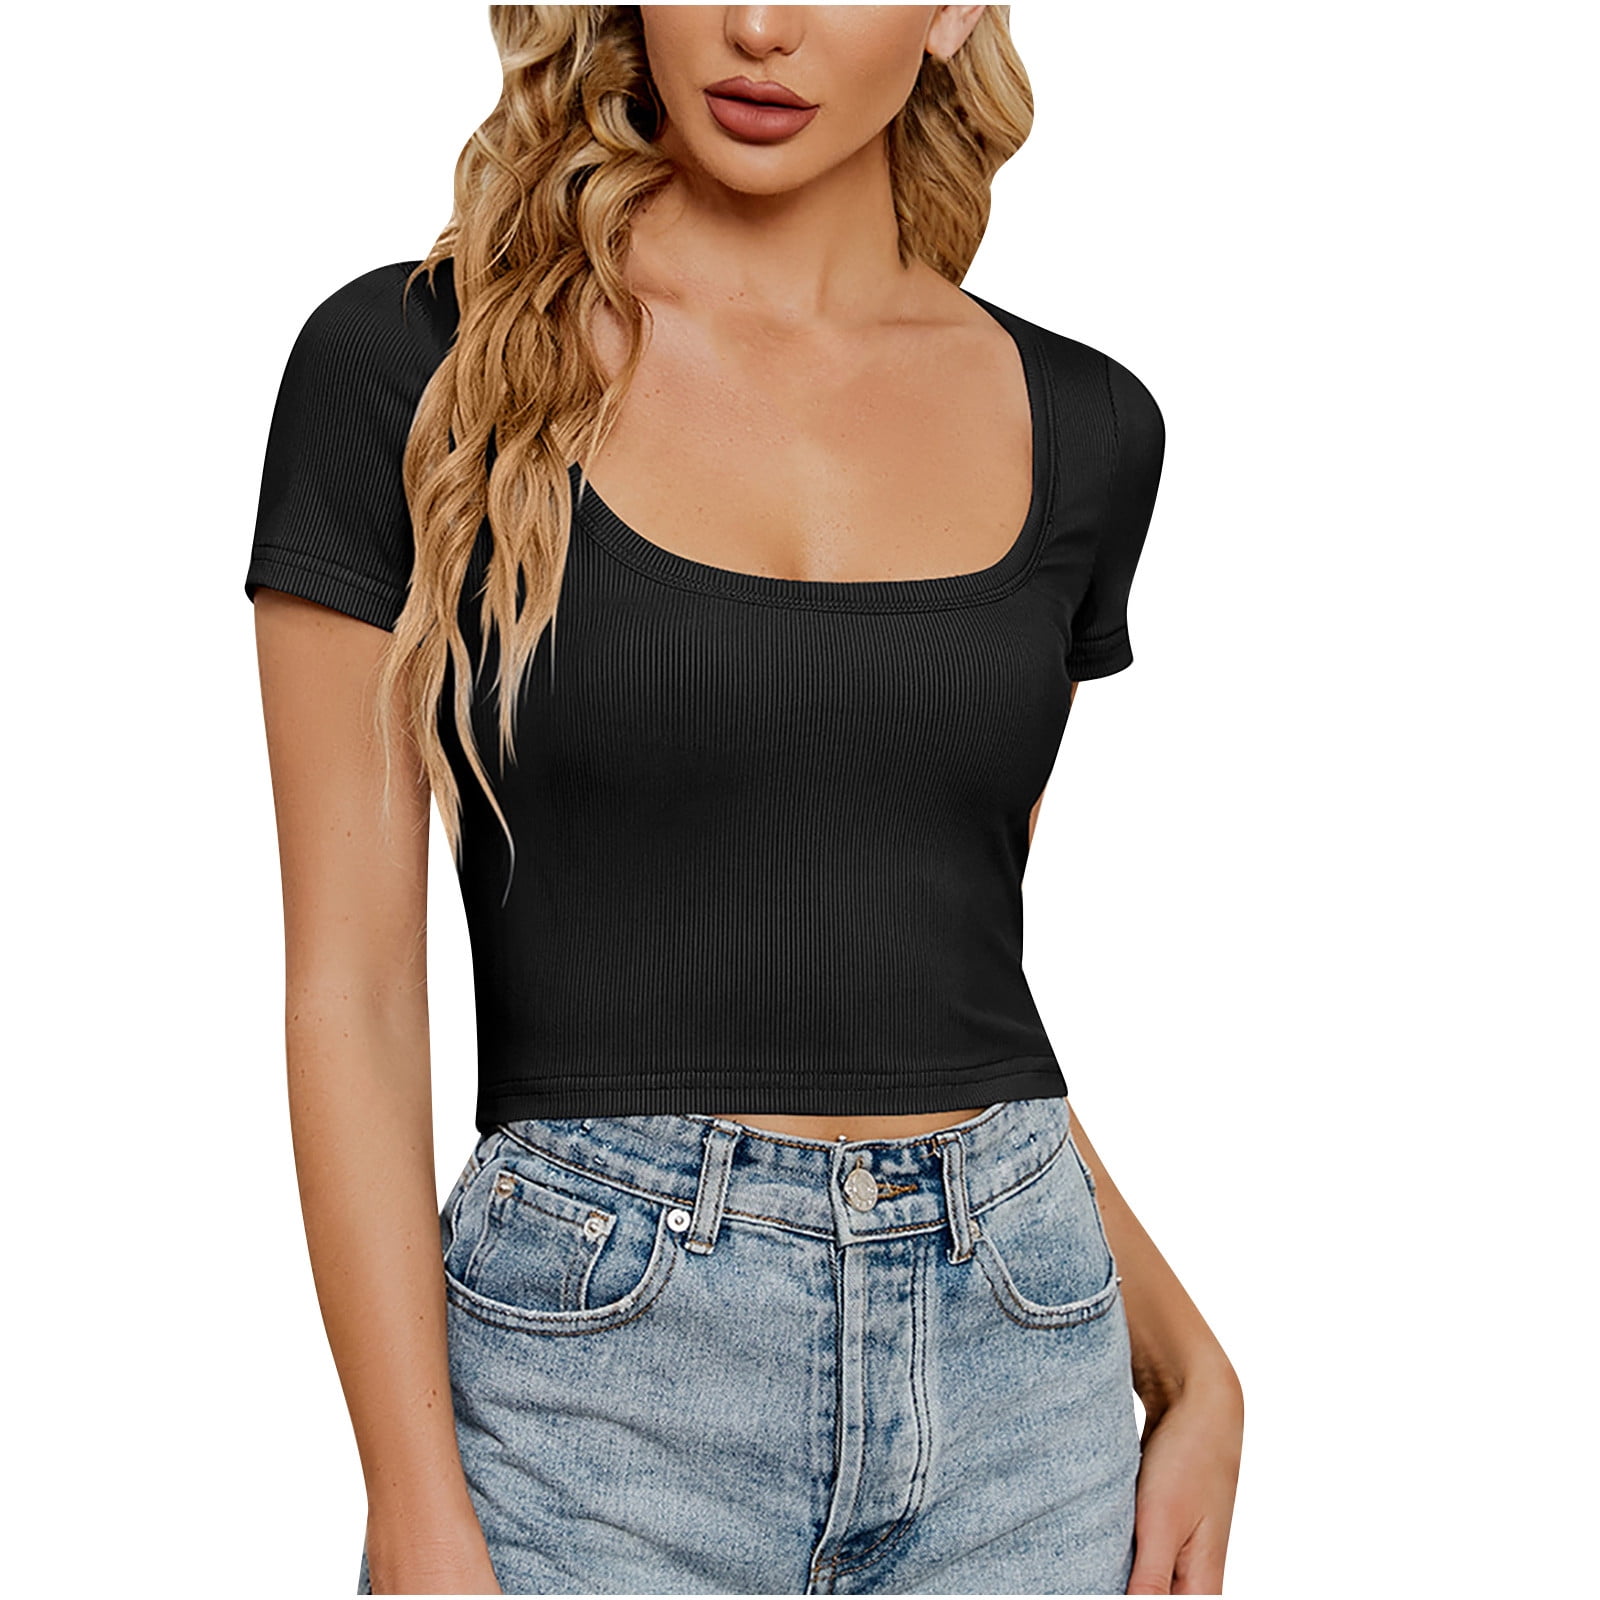 RYRJJ Women's Short Sleeve Crop Tops Square Neck Cropped T Shirts Y2K  Streetwear Sexy Slim Fit Ribbed Knit Basic Tees(Black,M) 